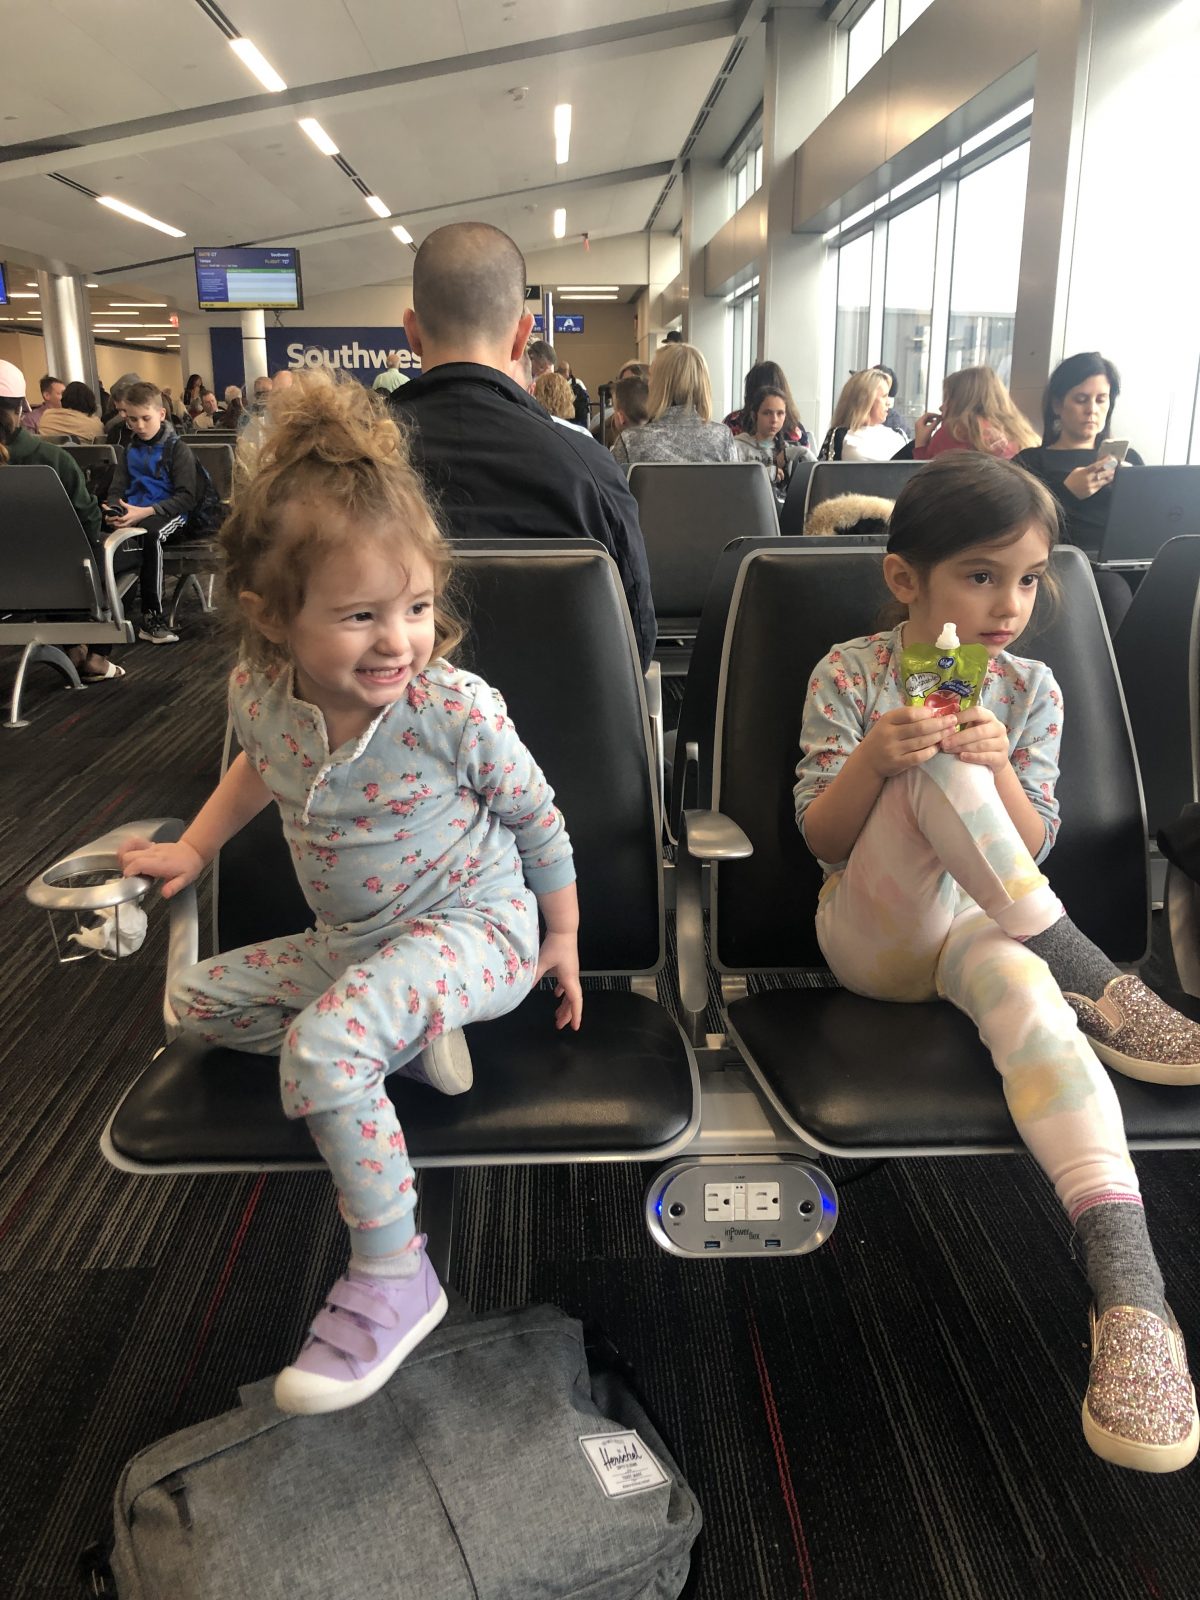 Toddlers waiting to board a plane in seating area